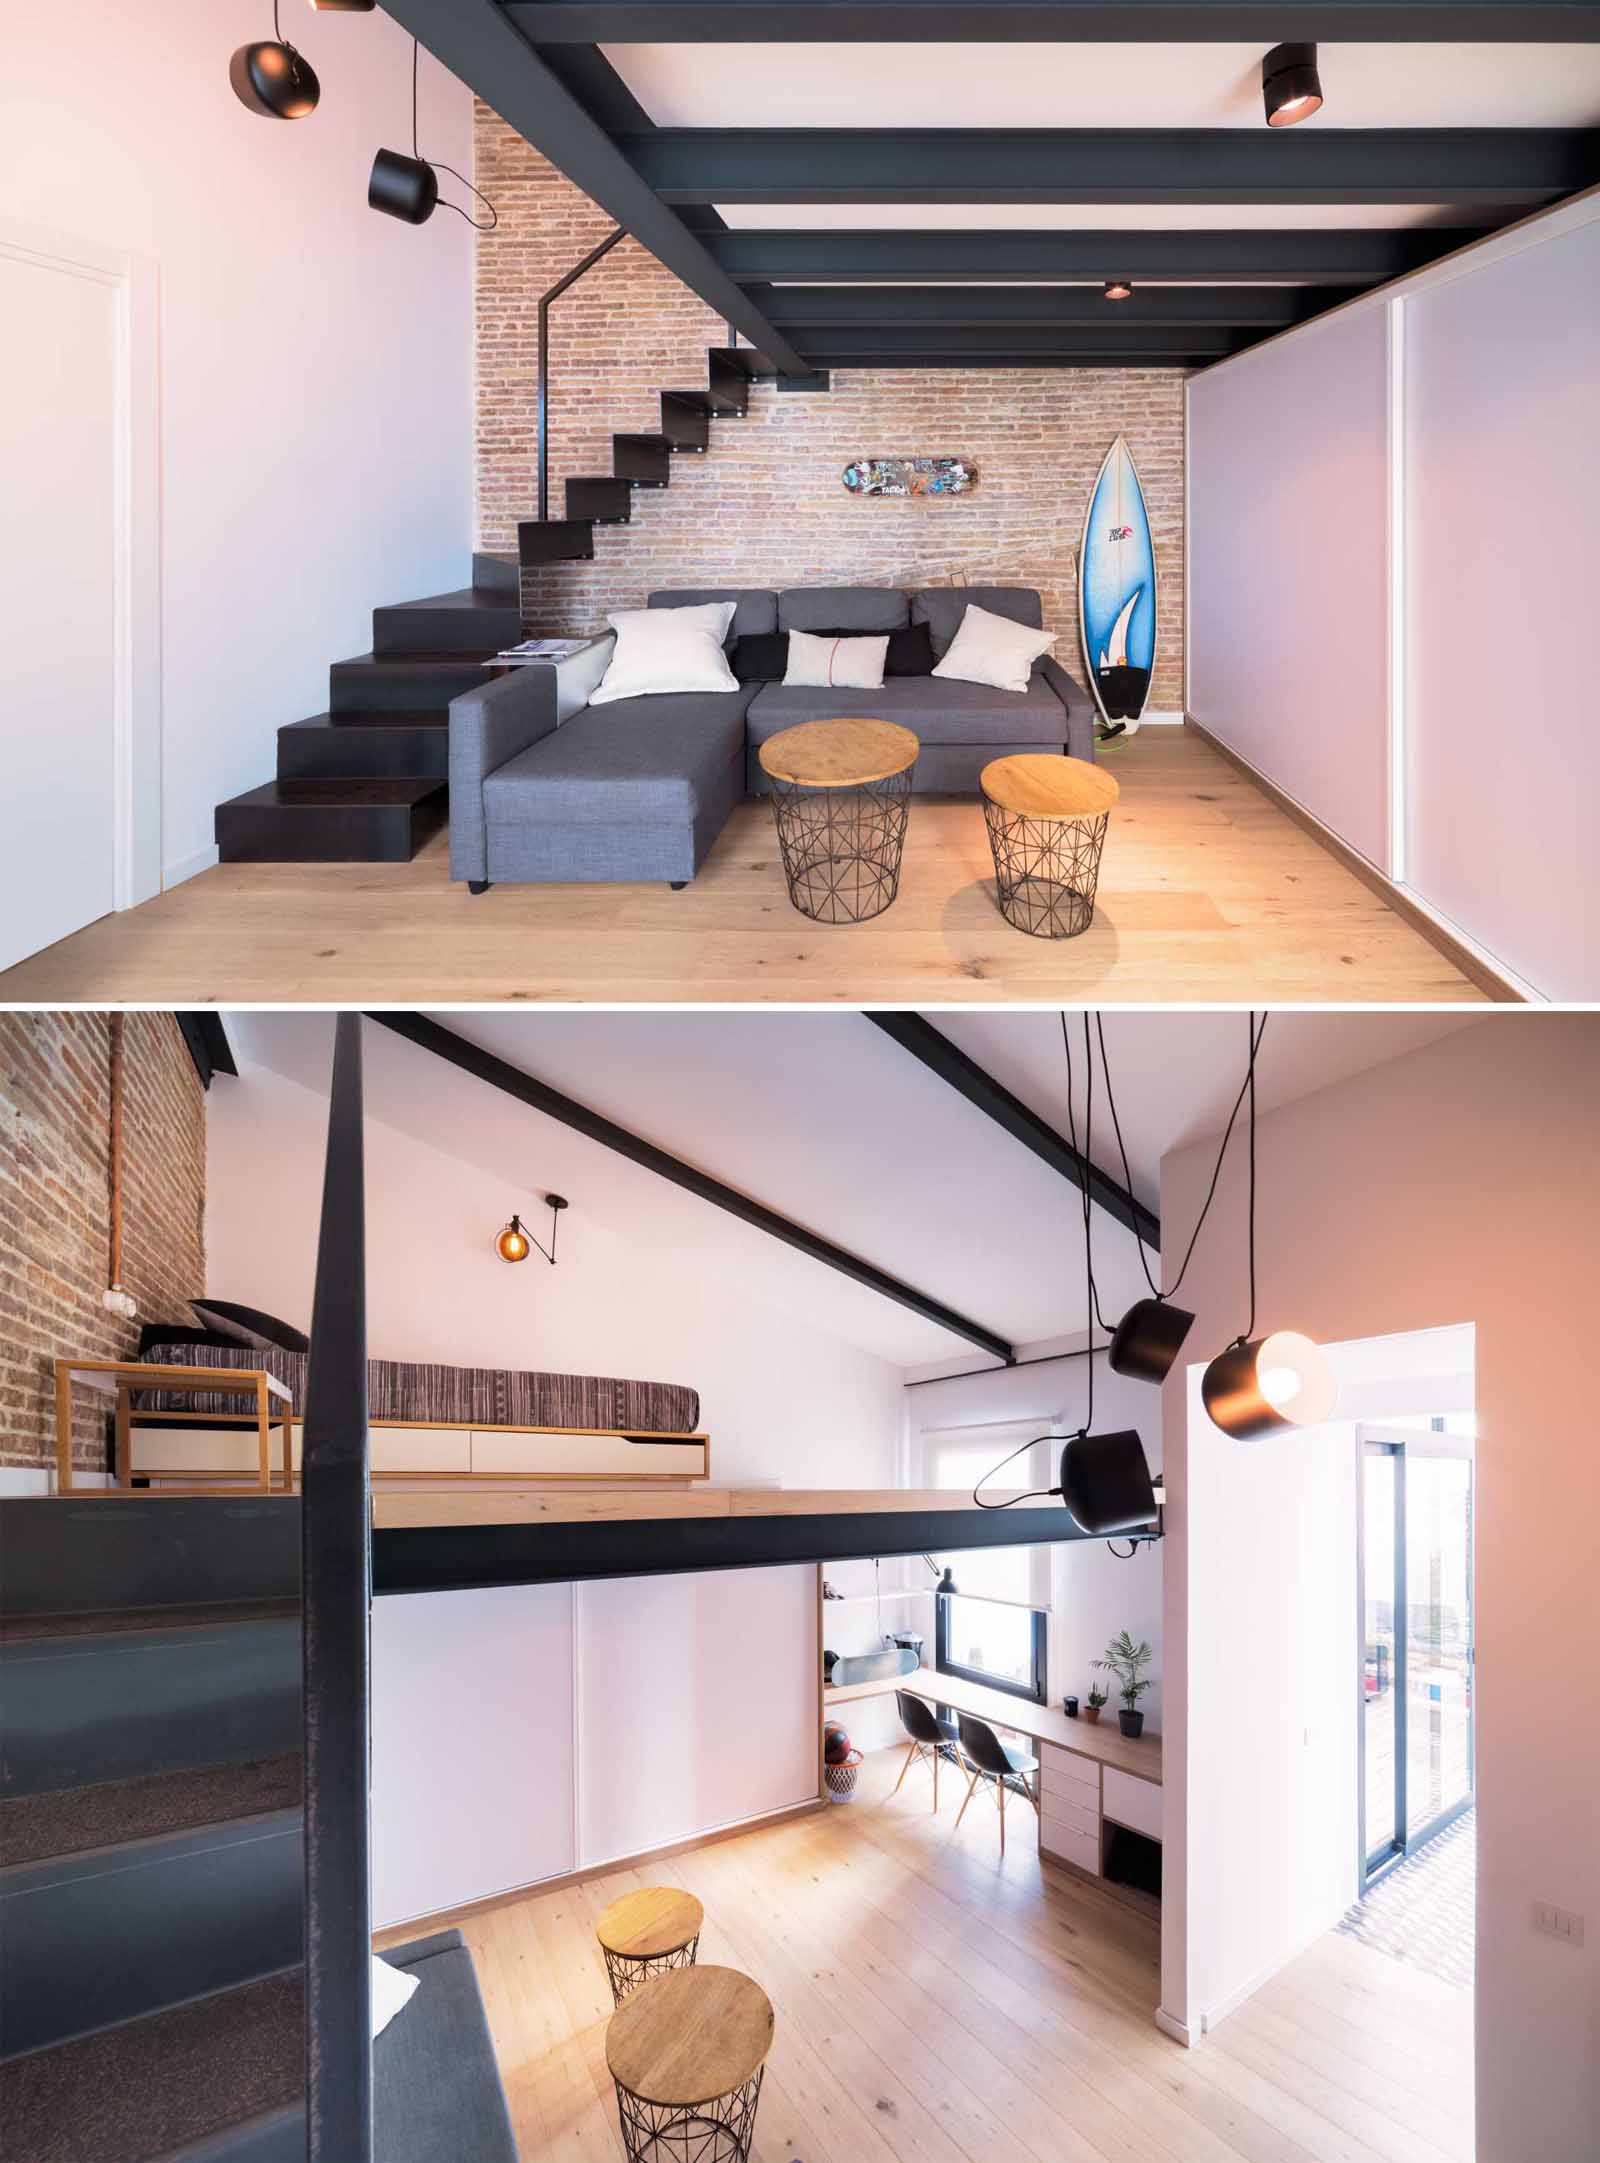 A loft bedroom with a sleeping area located on top of it, a large dressing room, study area, and chillout zone with sofas.